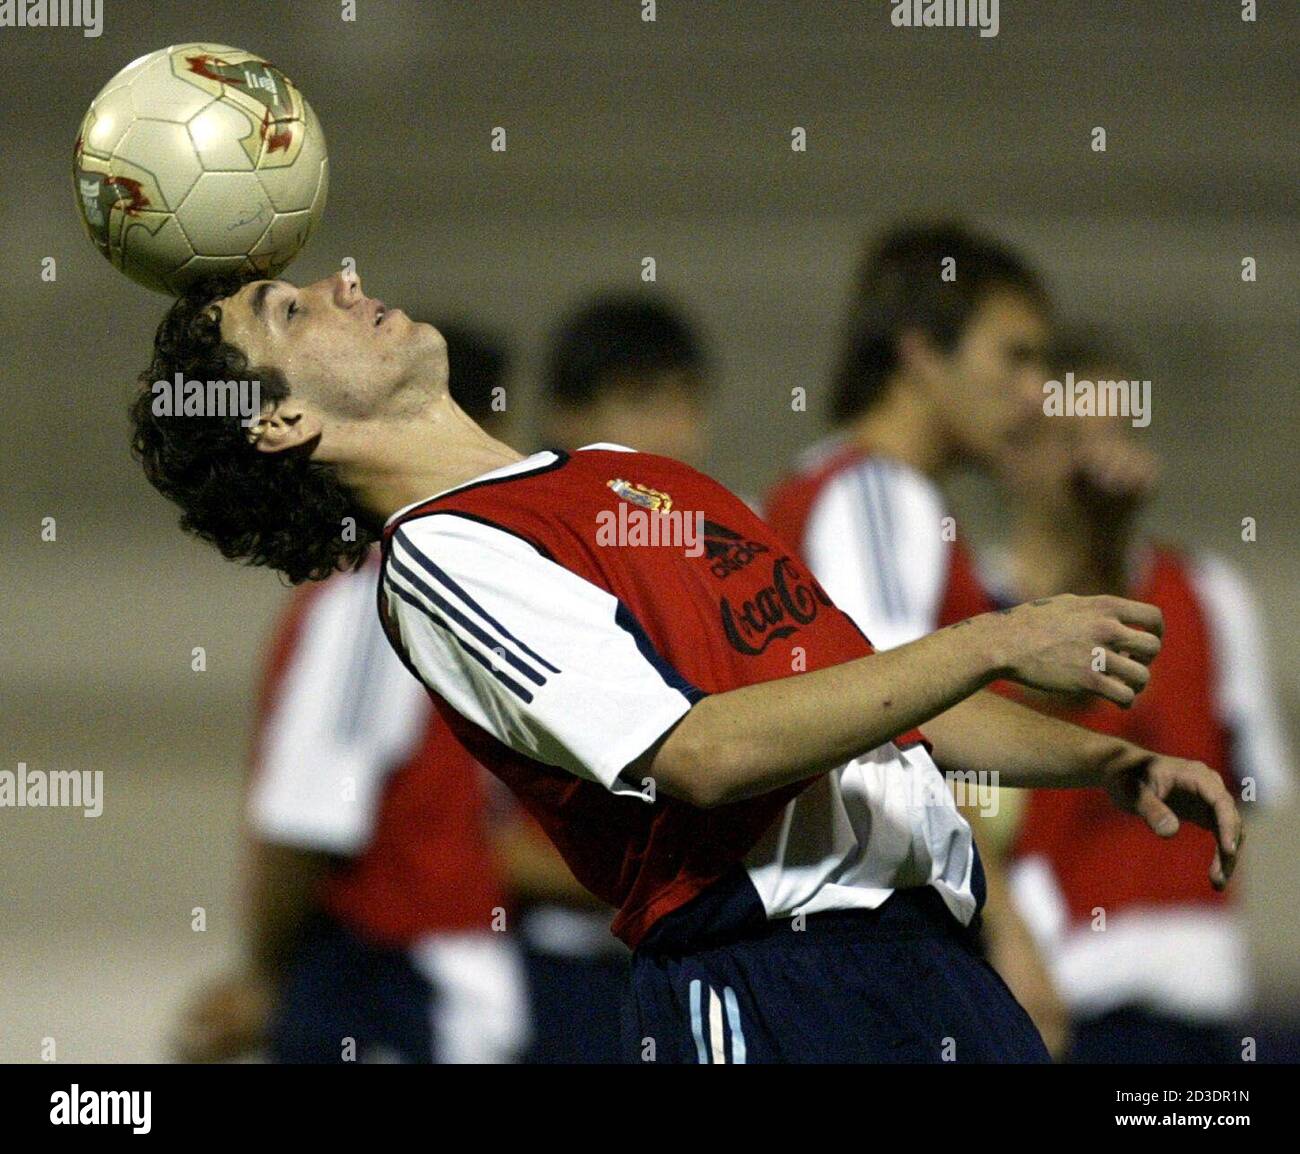 Argentina's under 20 soccer team player Gonzalo Rodriguez heads the ball  during a training session at Al Shaab Sports Club in Sharjah, November 27,  2003. Argentina will face Spain on November 28